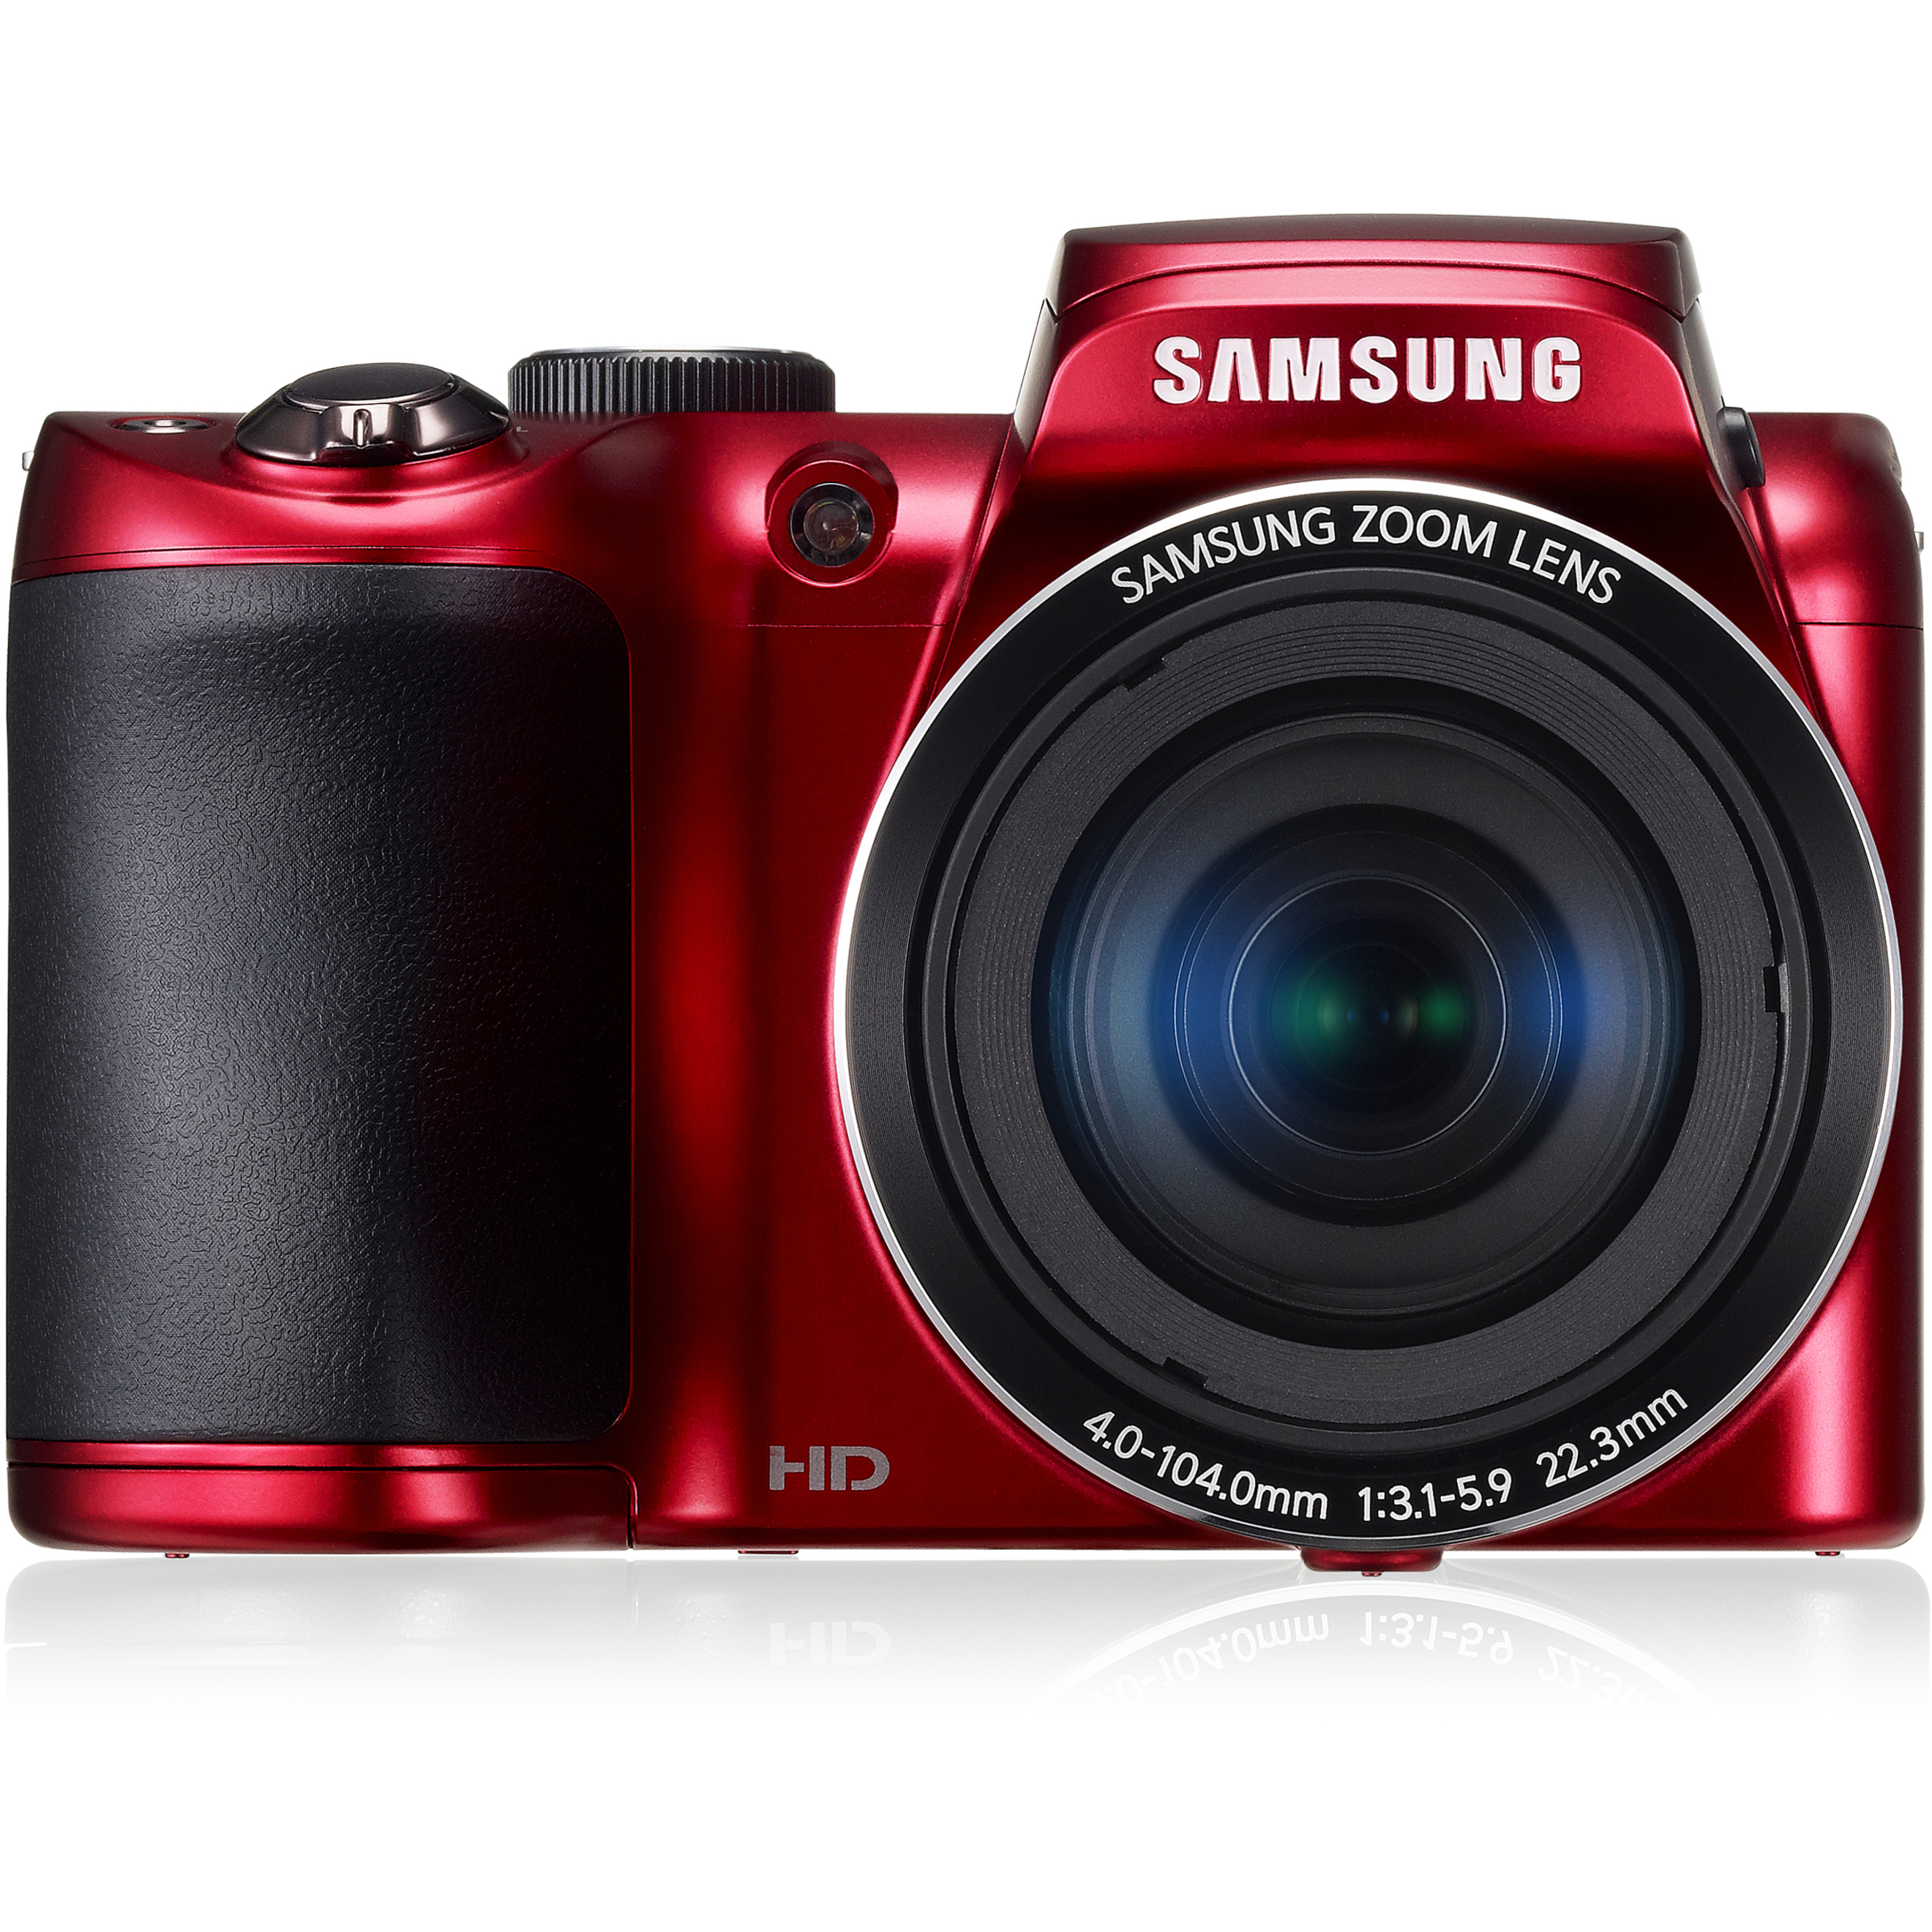 Samsung WB100 16.2 Megapixel Compact Camera, Red - image 1 of 6